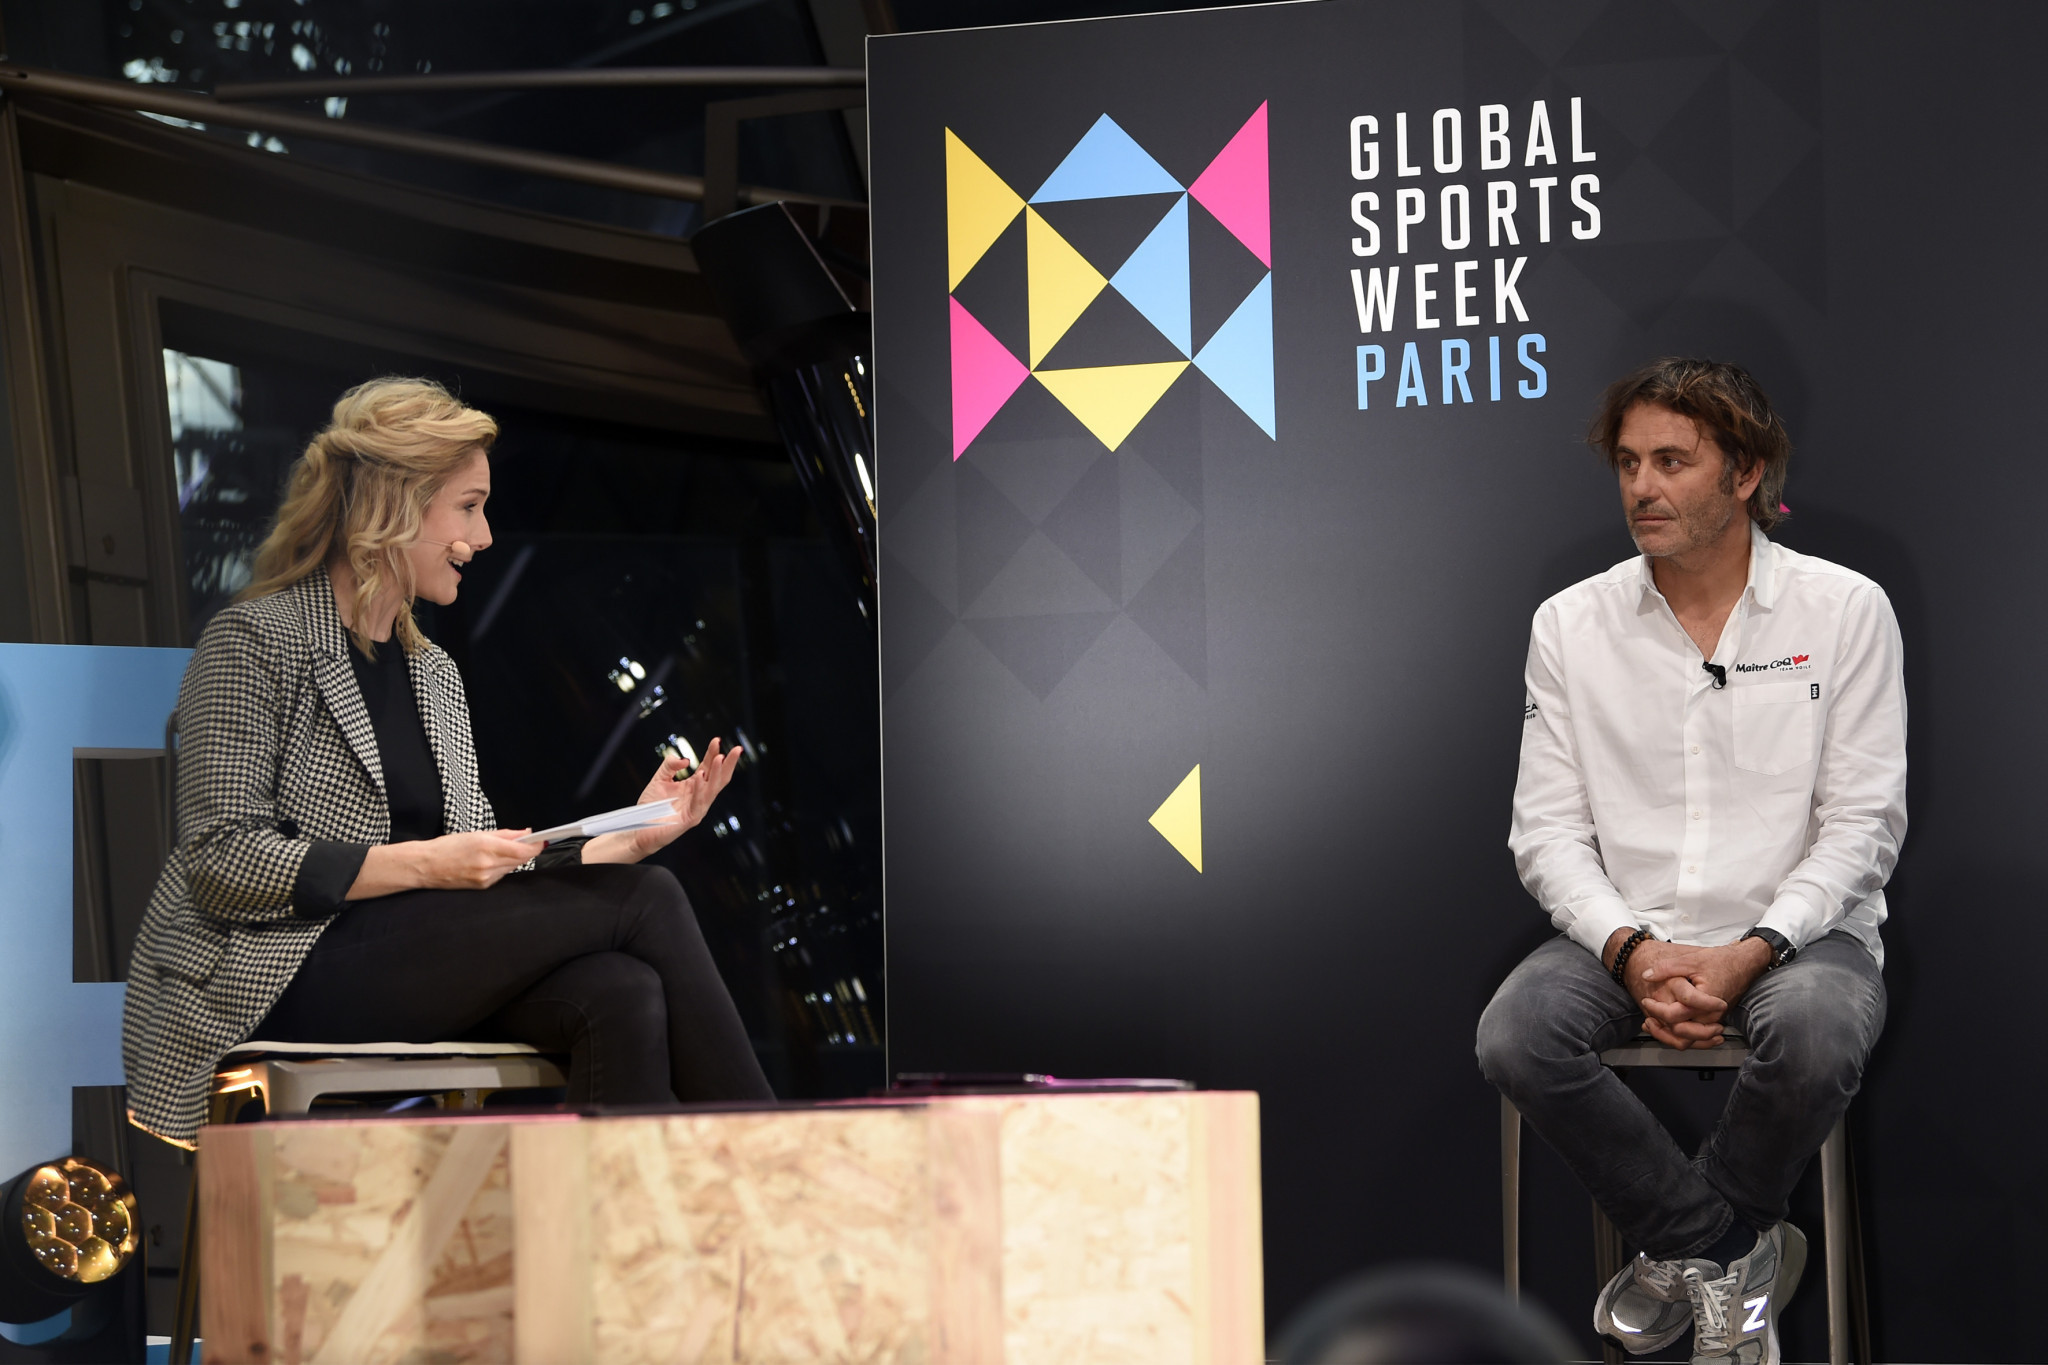 Global Sports Week Paris is due to be held from May 9 to 13 ©GSW Paris